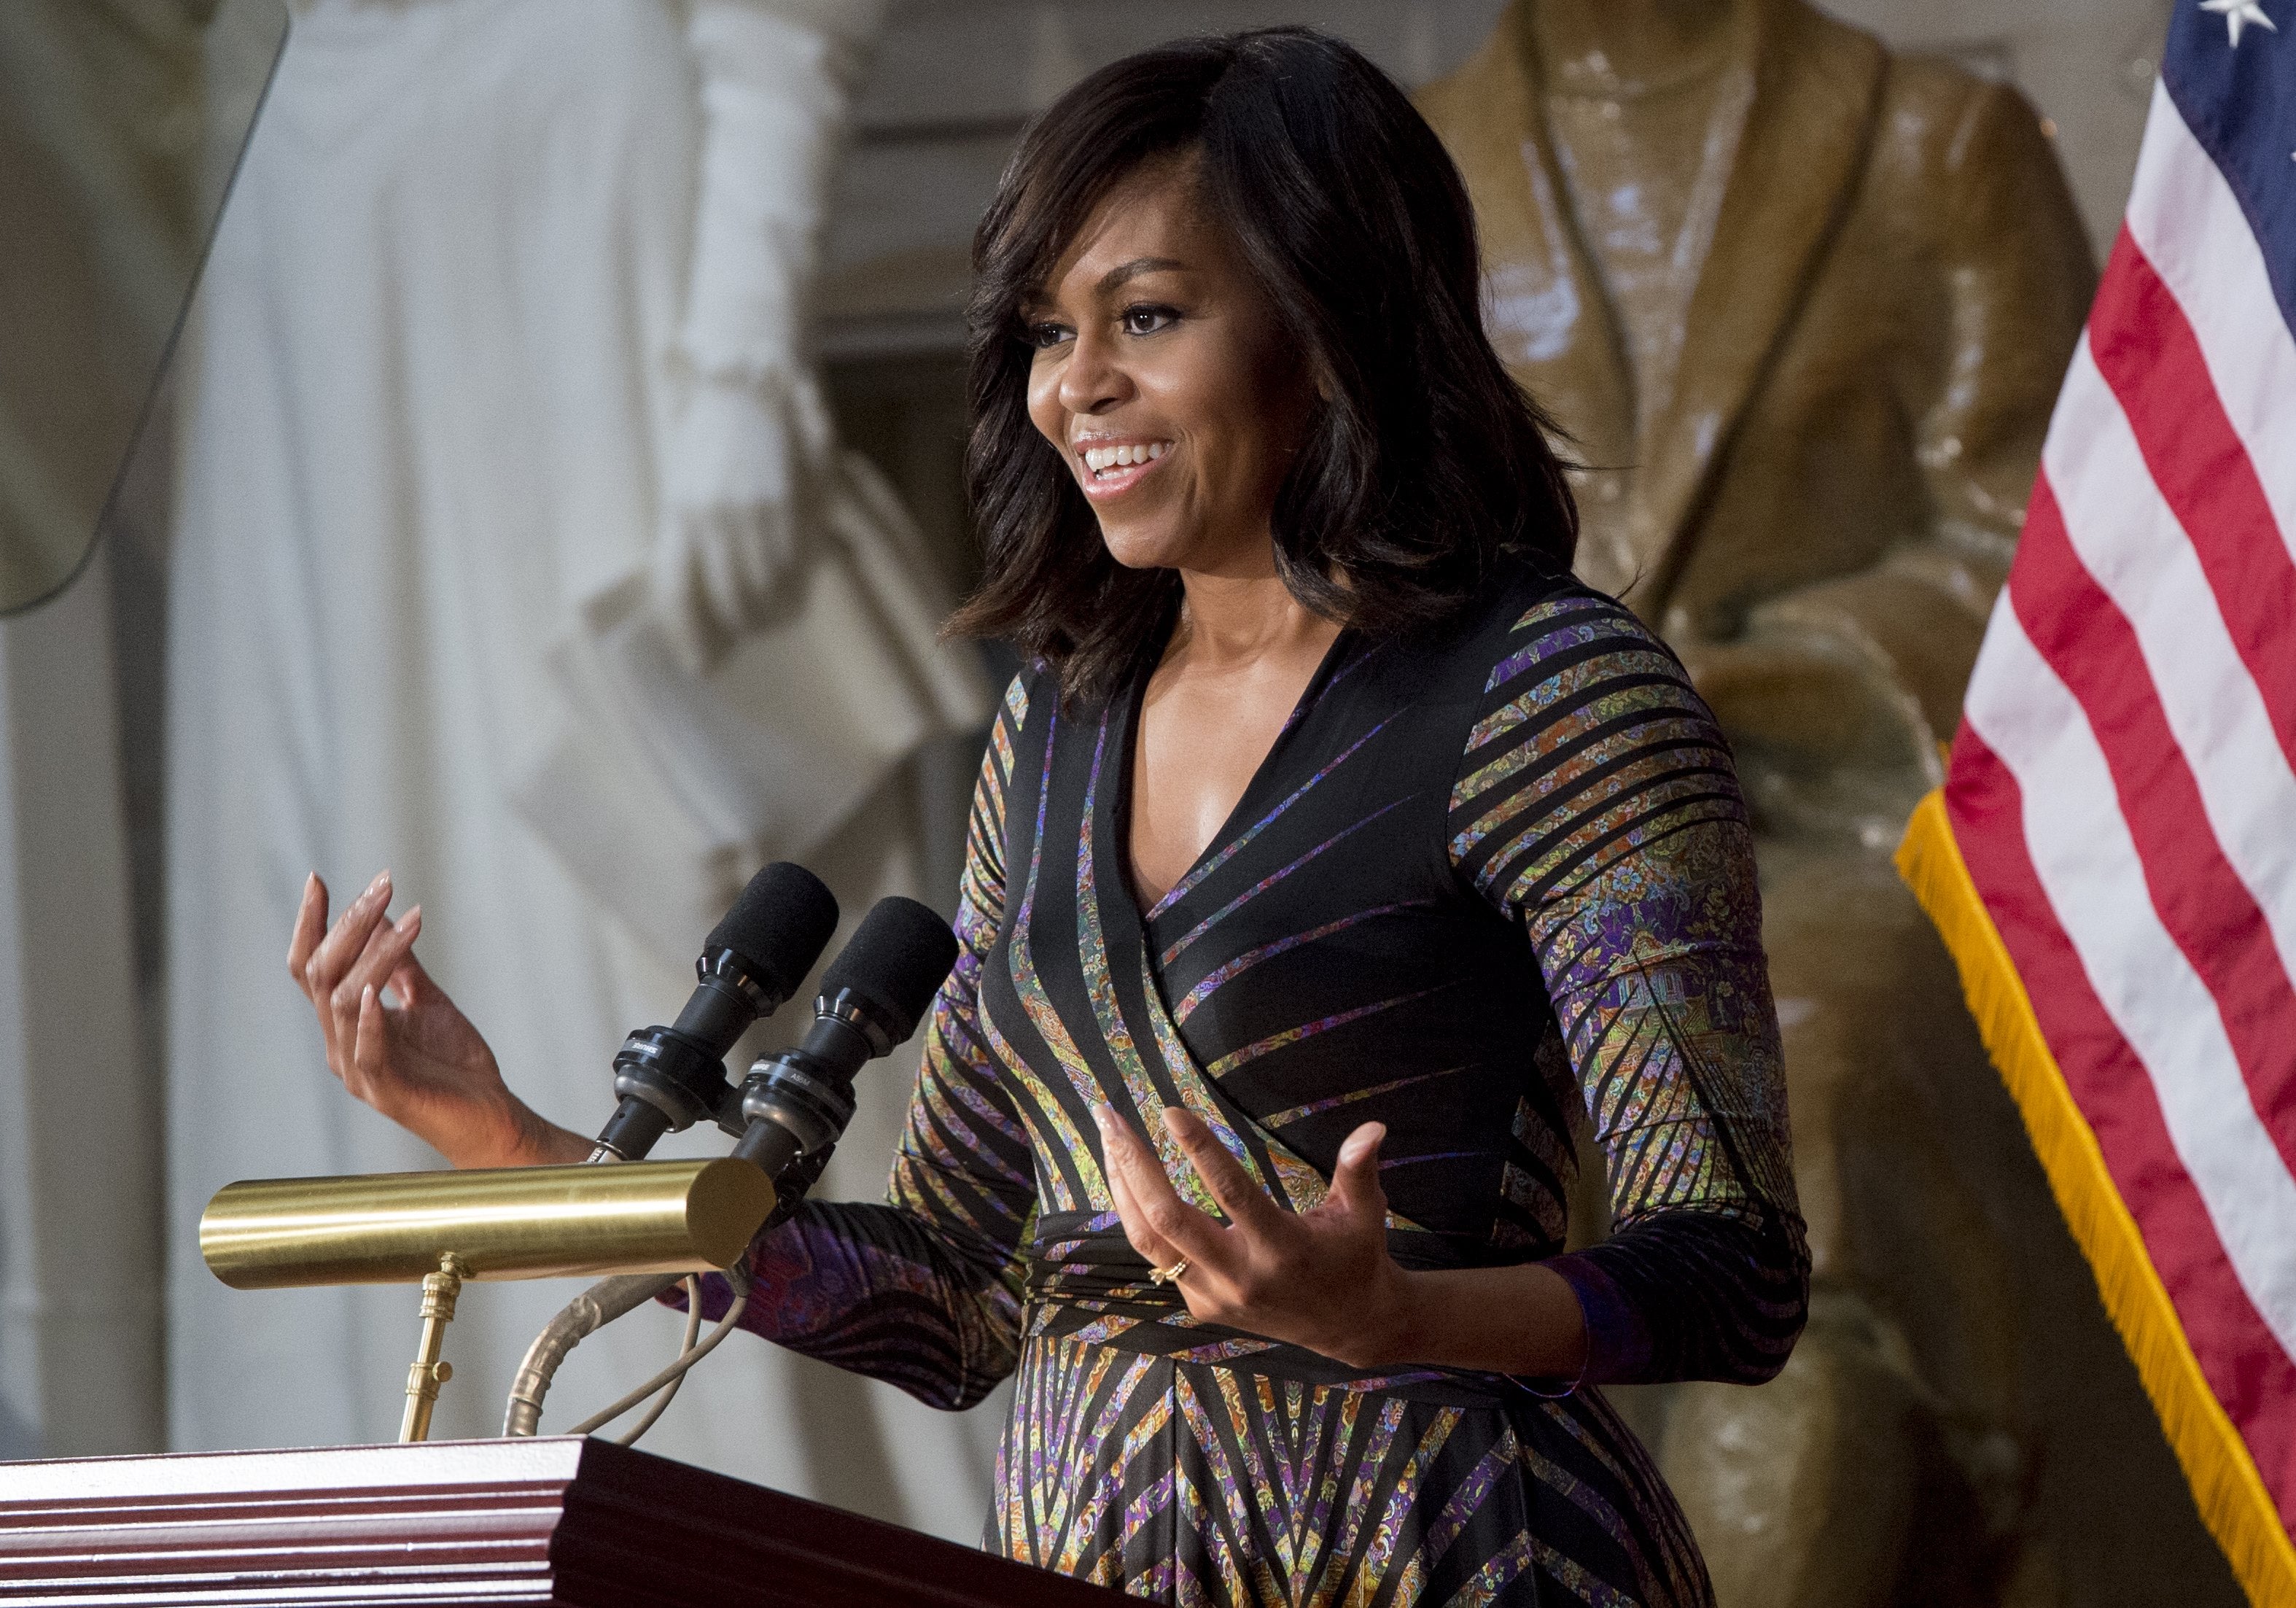 Michelle Obama's Most Fashionable Moments of 2016
